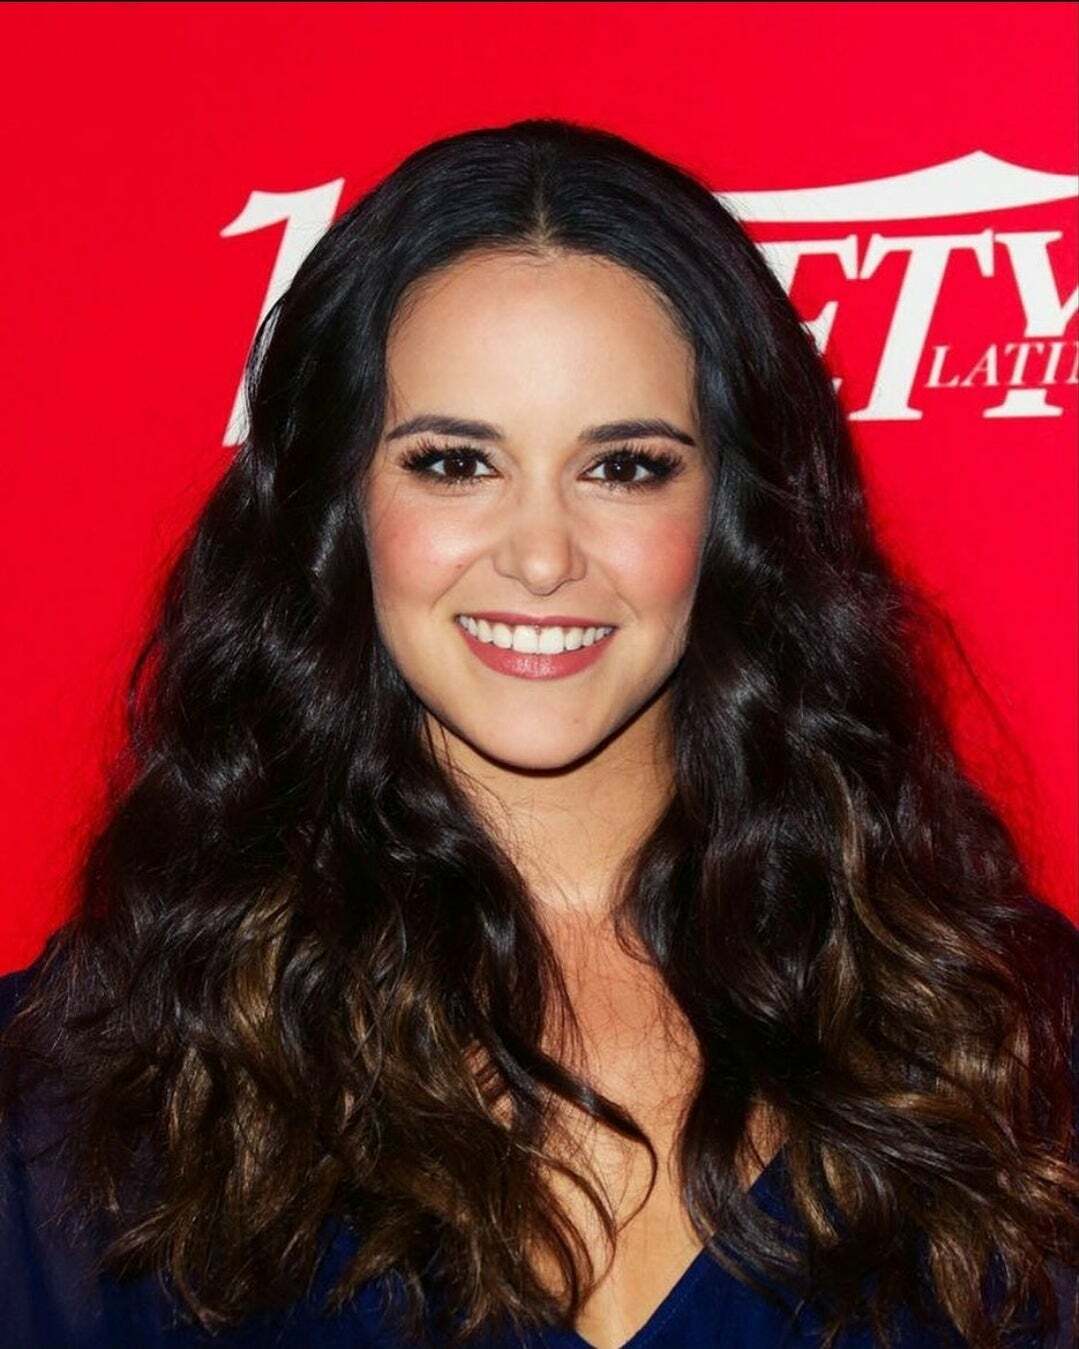 Melissa Fumero face would be perfect for a bukkake